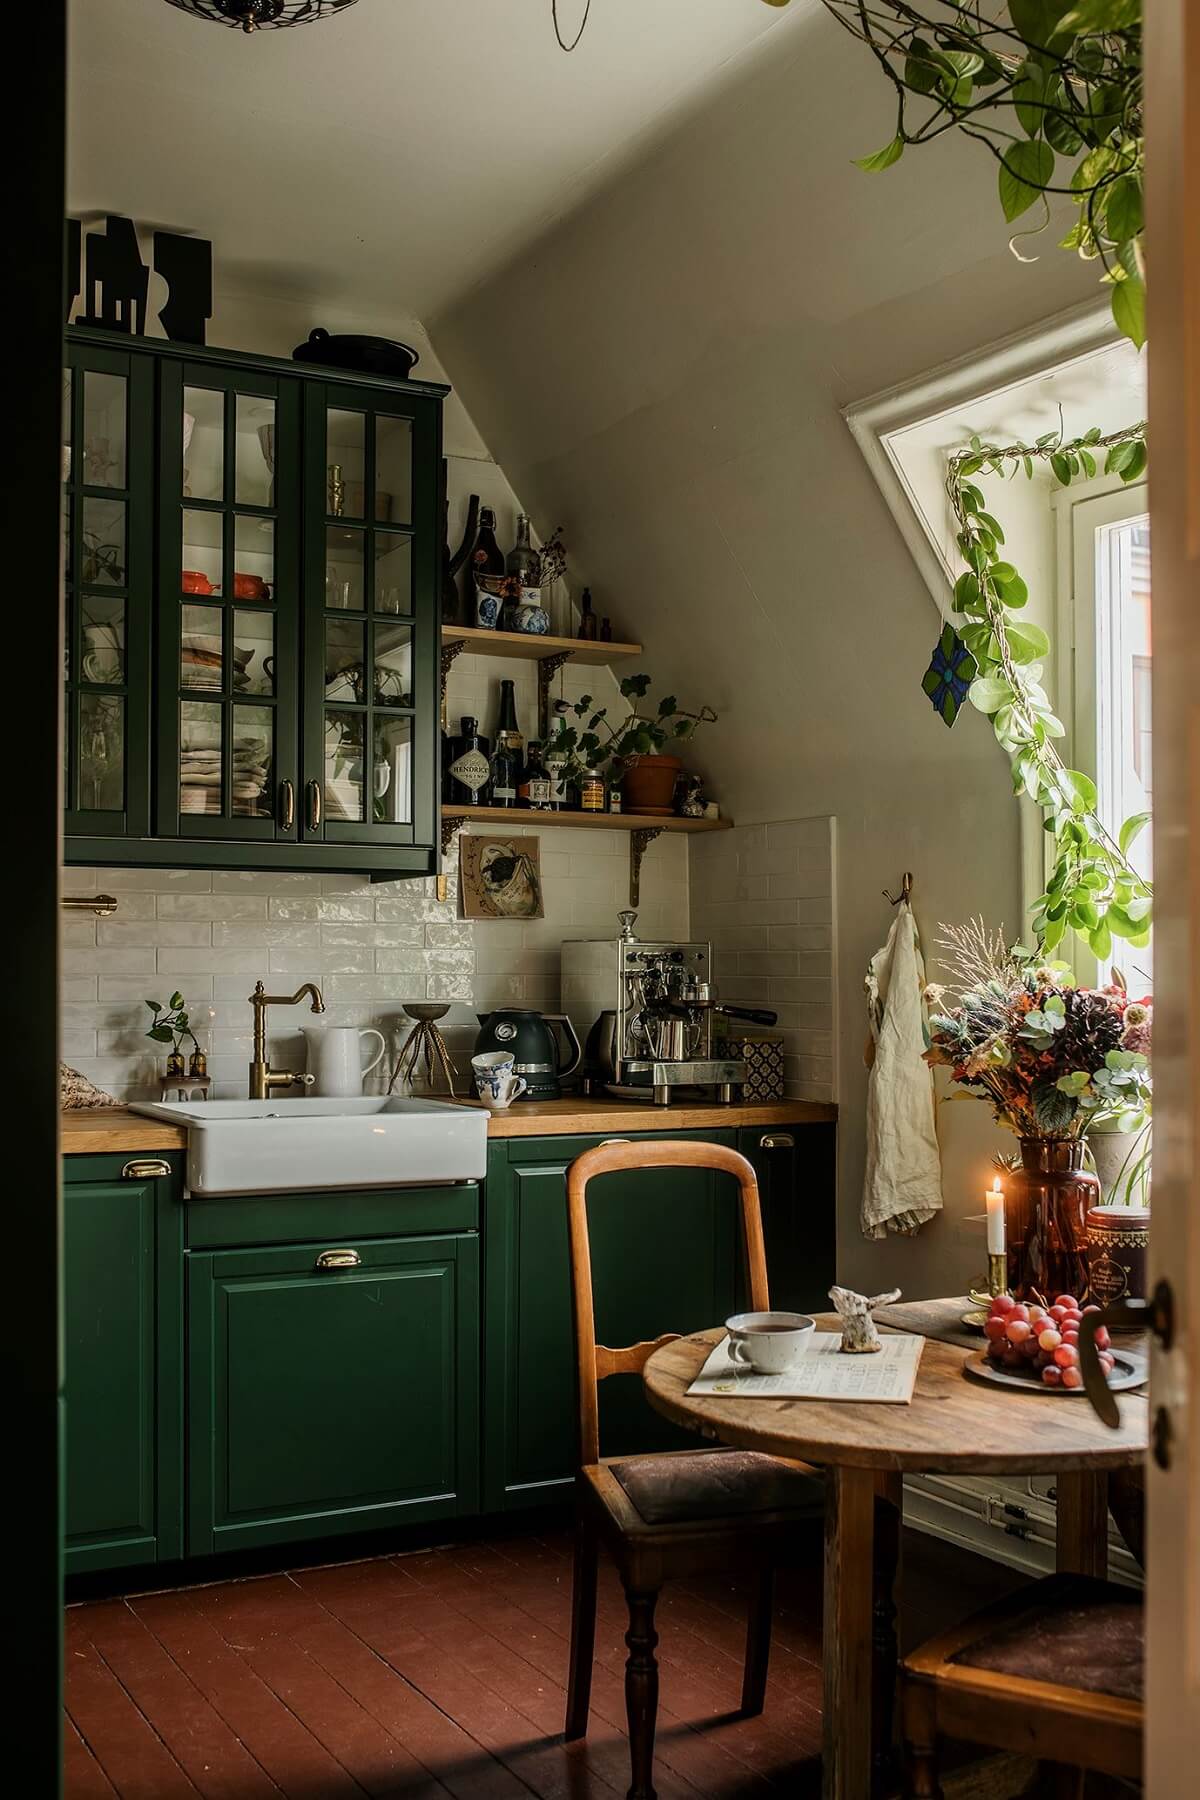 A Cozy Green Kitchen in a Vintage Attic Apartment